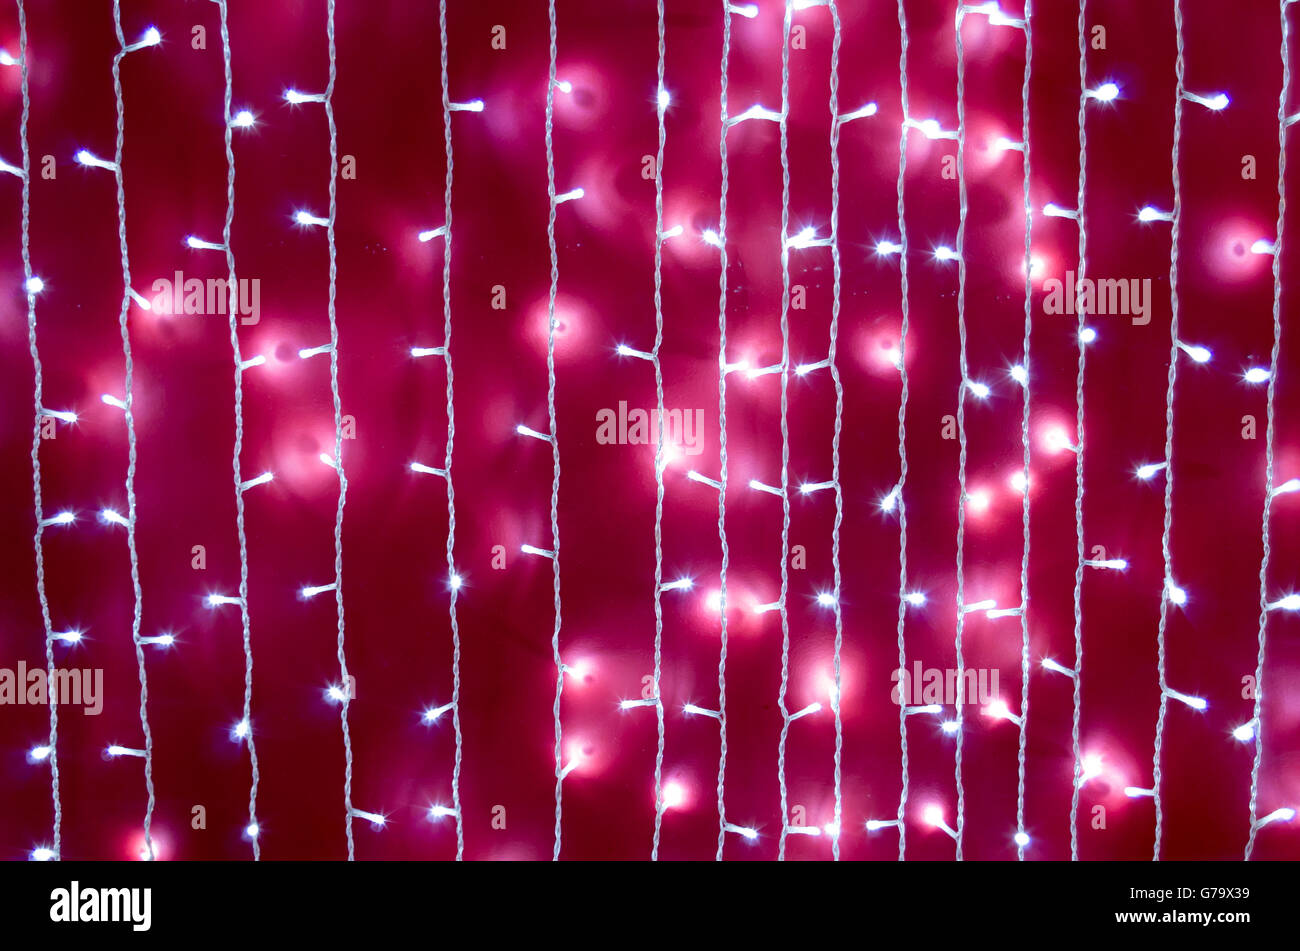 Defocused and blurred image of a bright red wall with white lights on the white wires vertical rows. Stock Photo